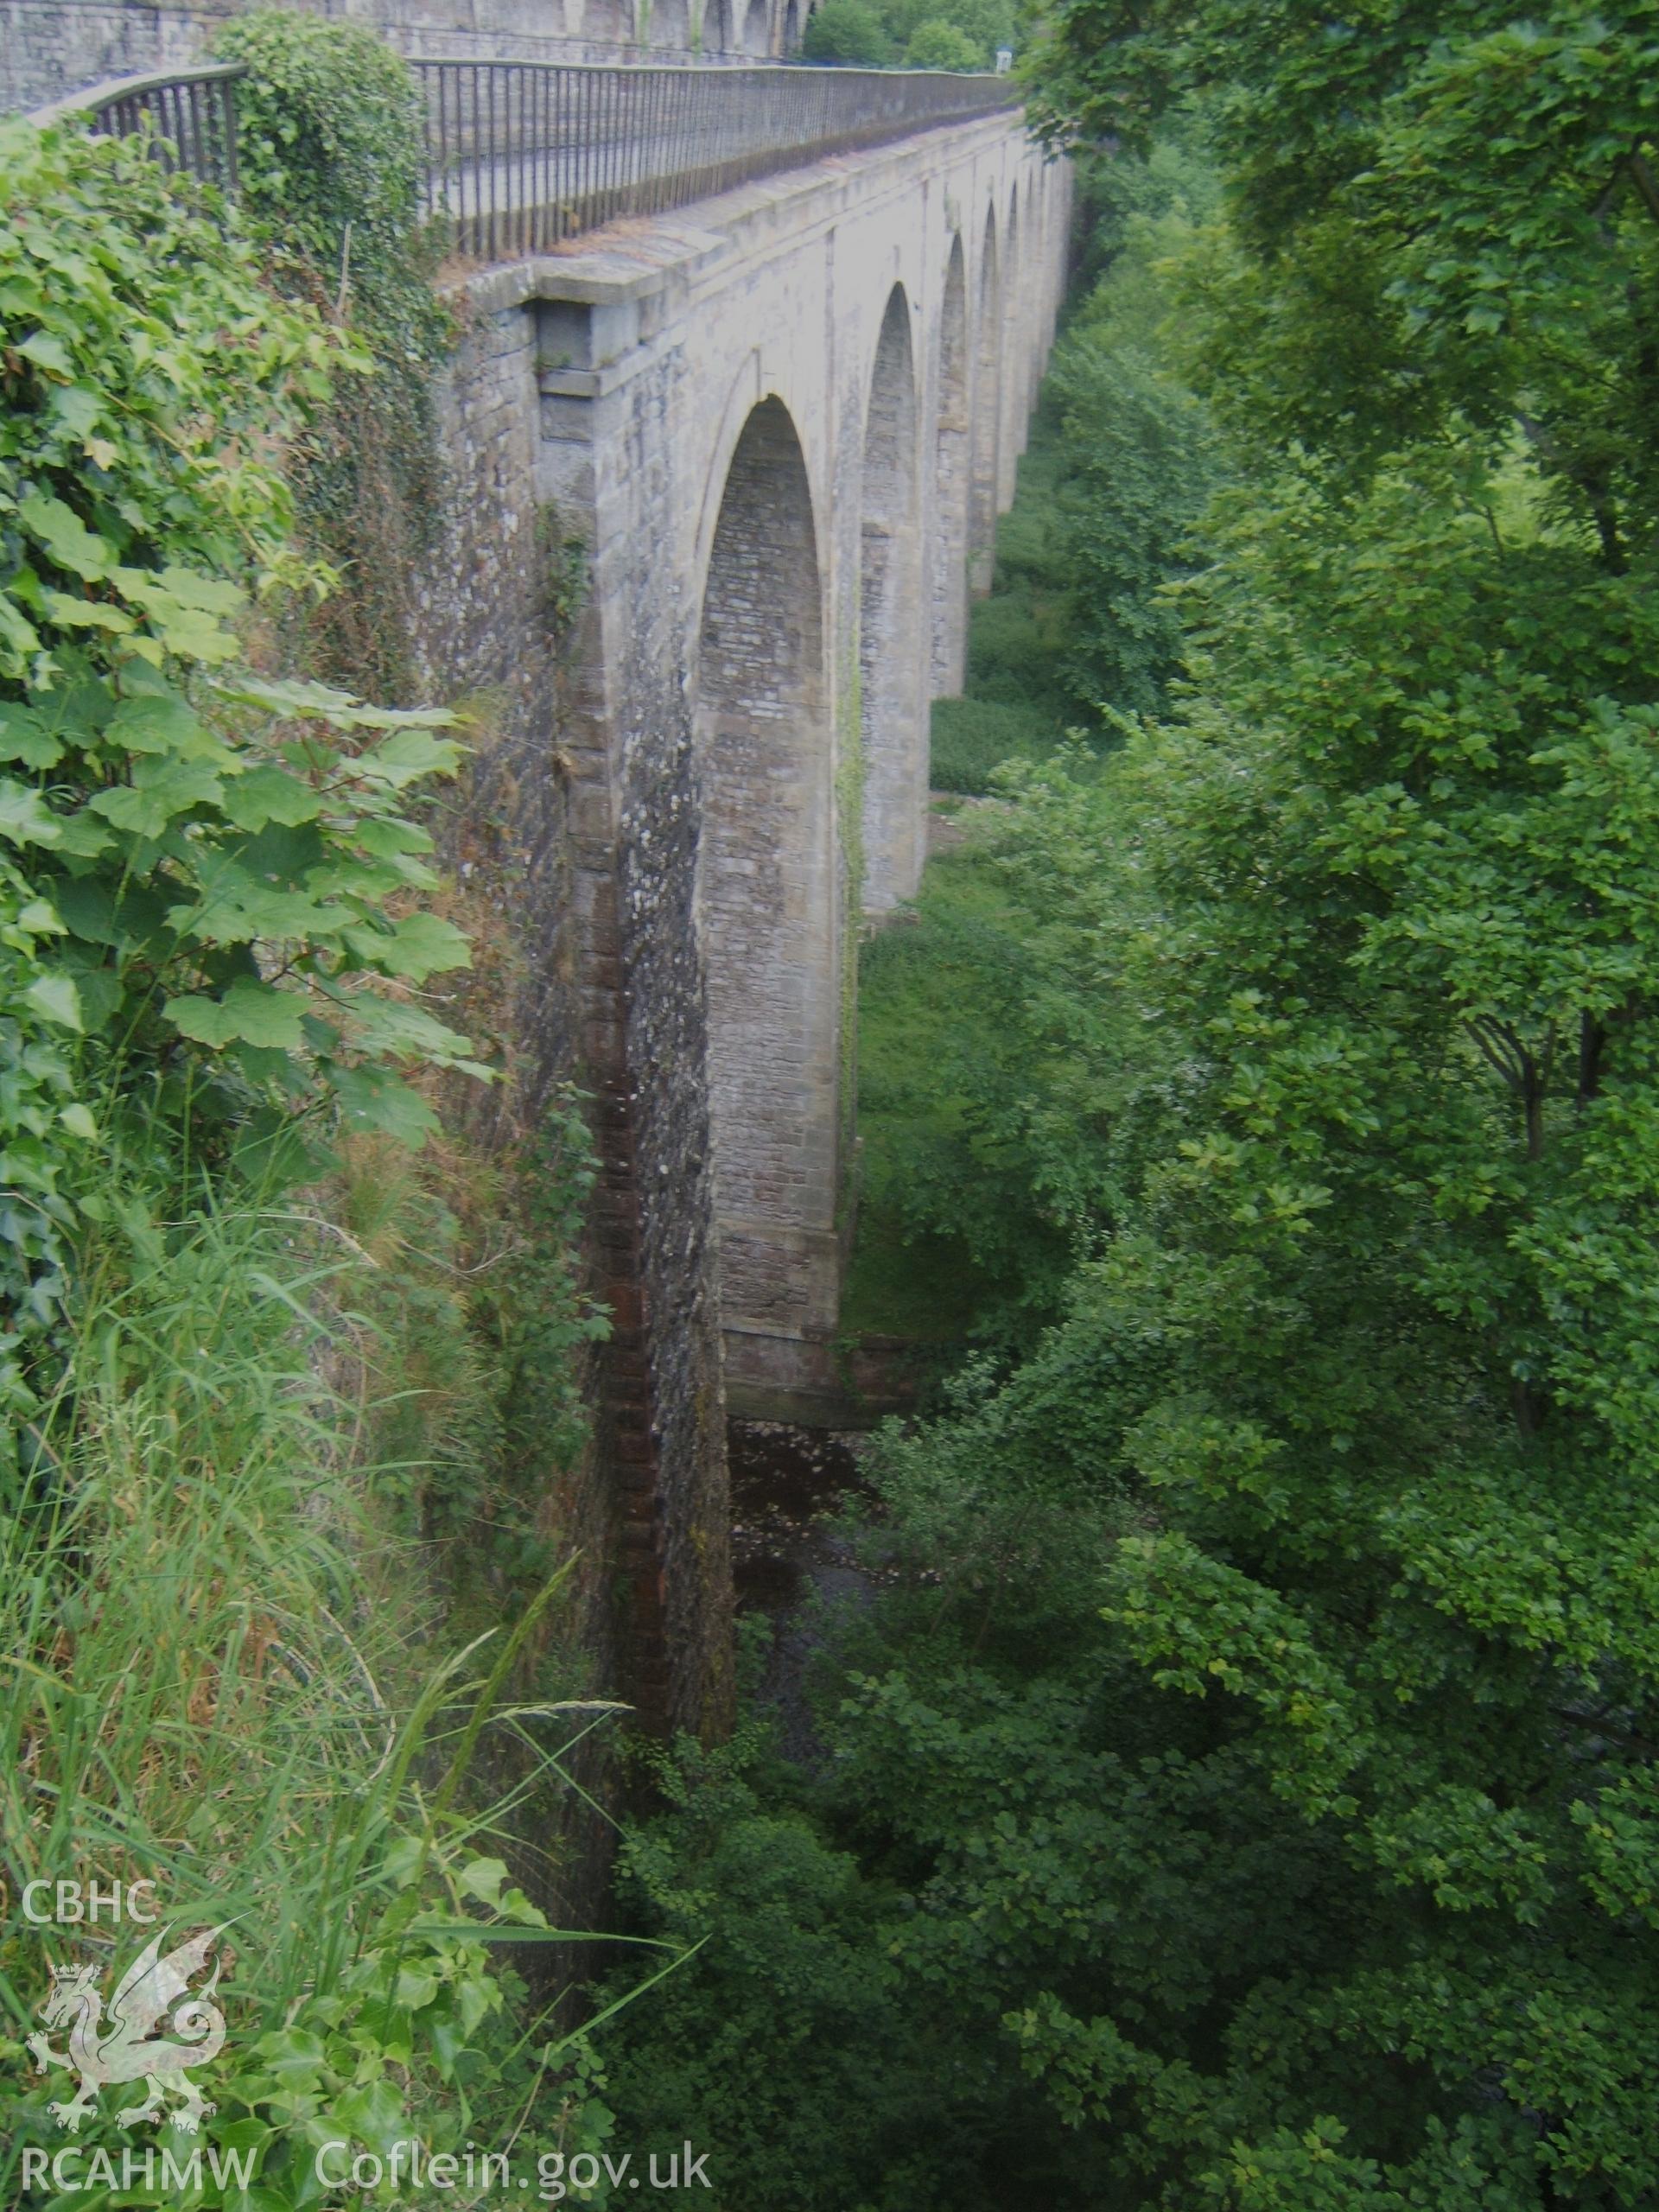 North-east elevation of Chirk Aqueduct from the south-east abutment.